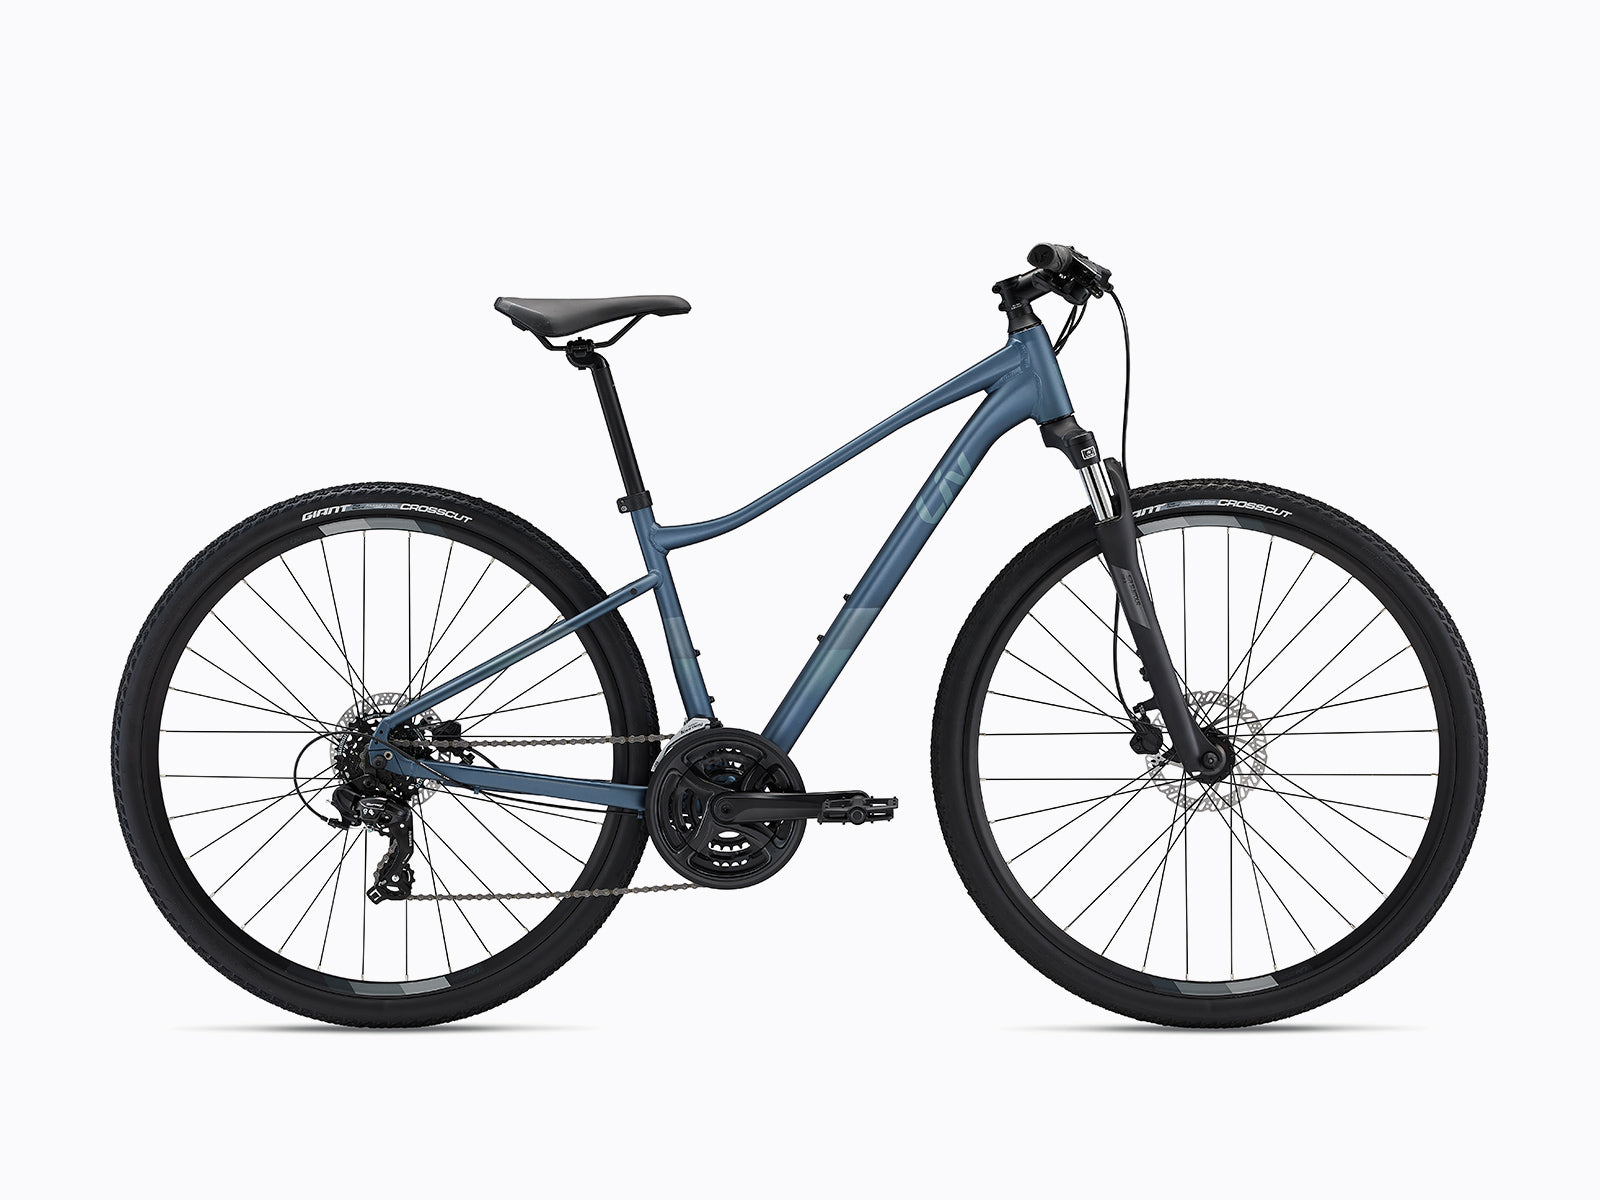 image features a Liv Rove 4 DD, a hybrid ladies bike that feels at home in city and in a mountain trail